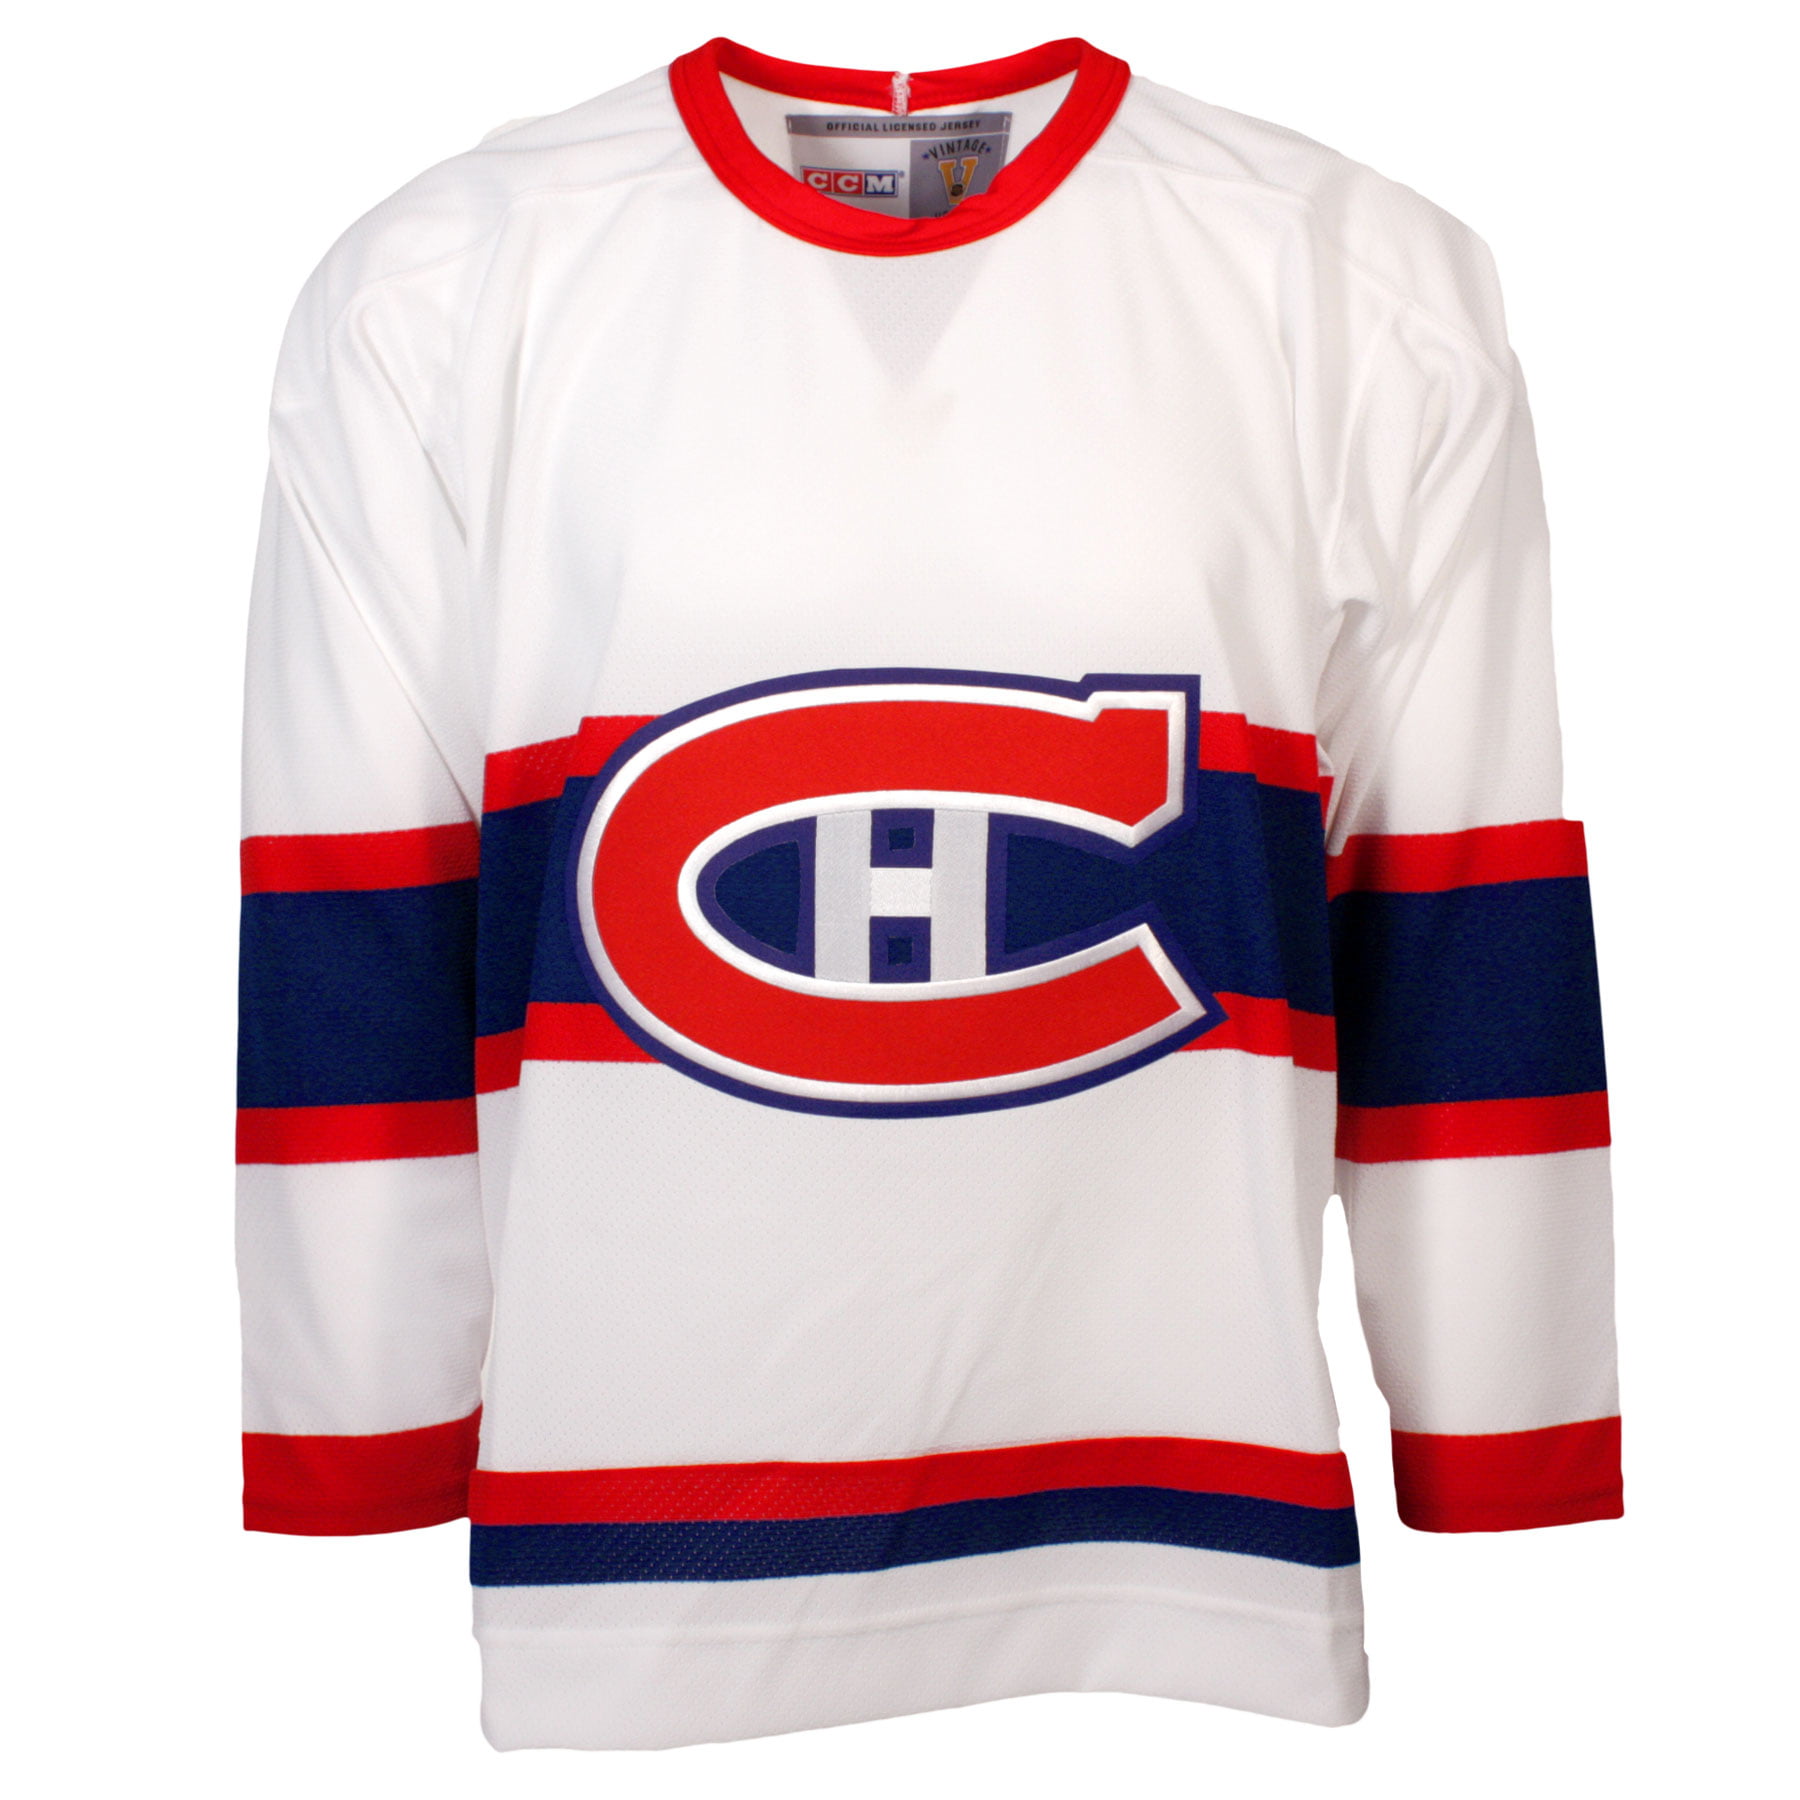 Montreal Canadiens throwback jersey